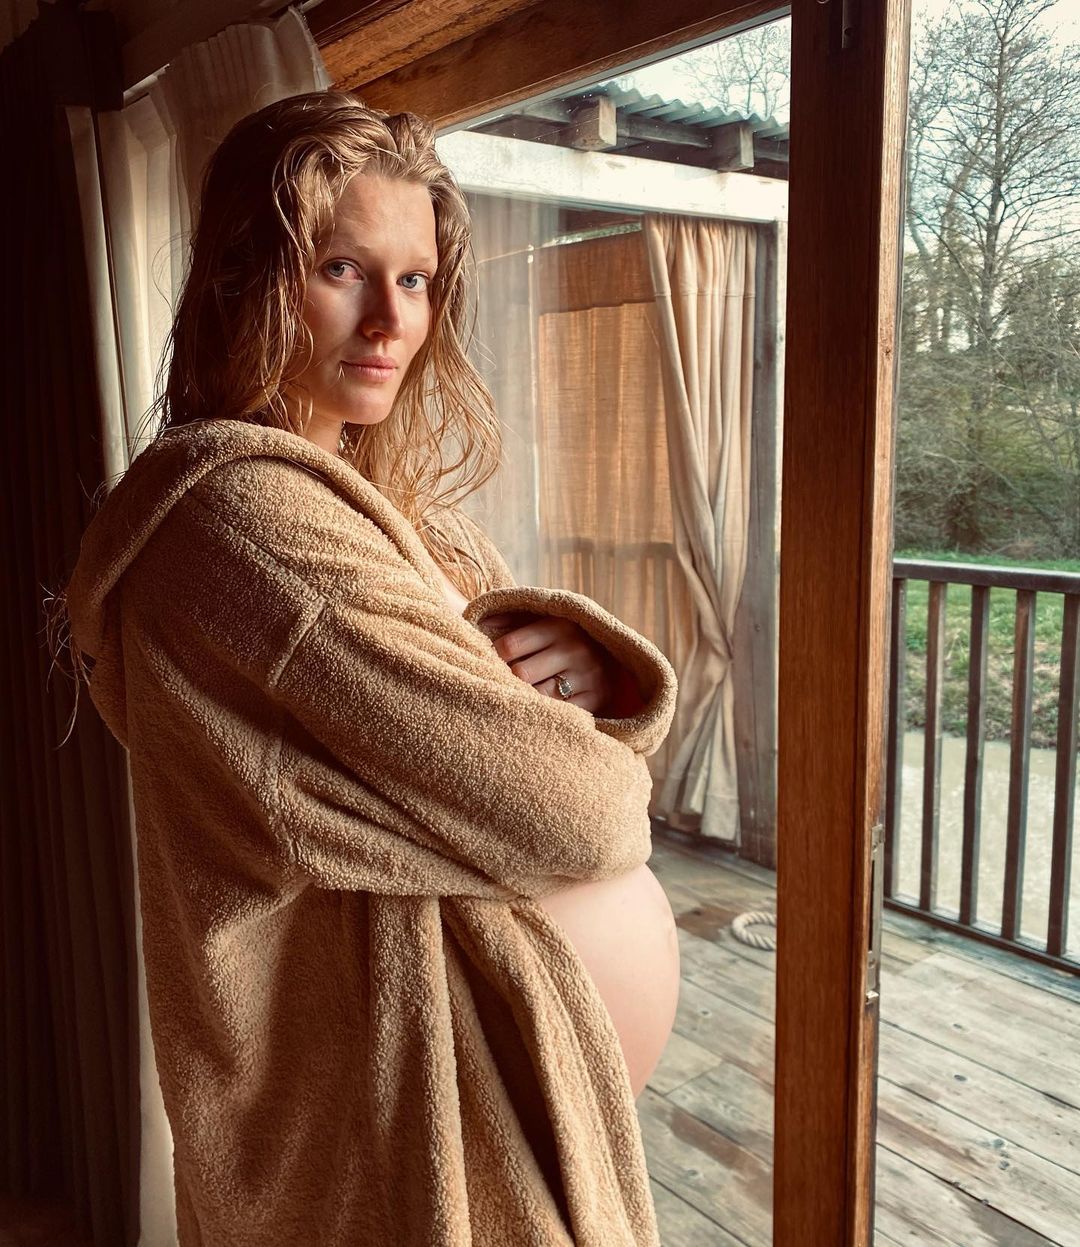 Celebrities Posing Nude While Pregnant Maternity Pics picture